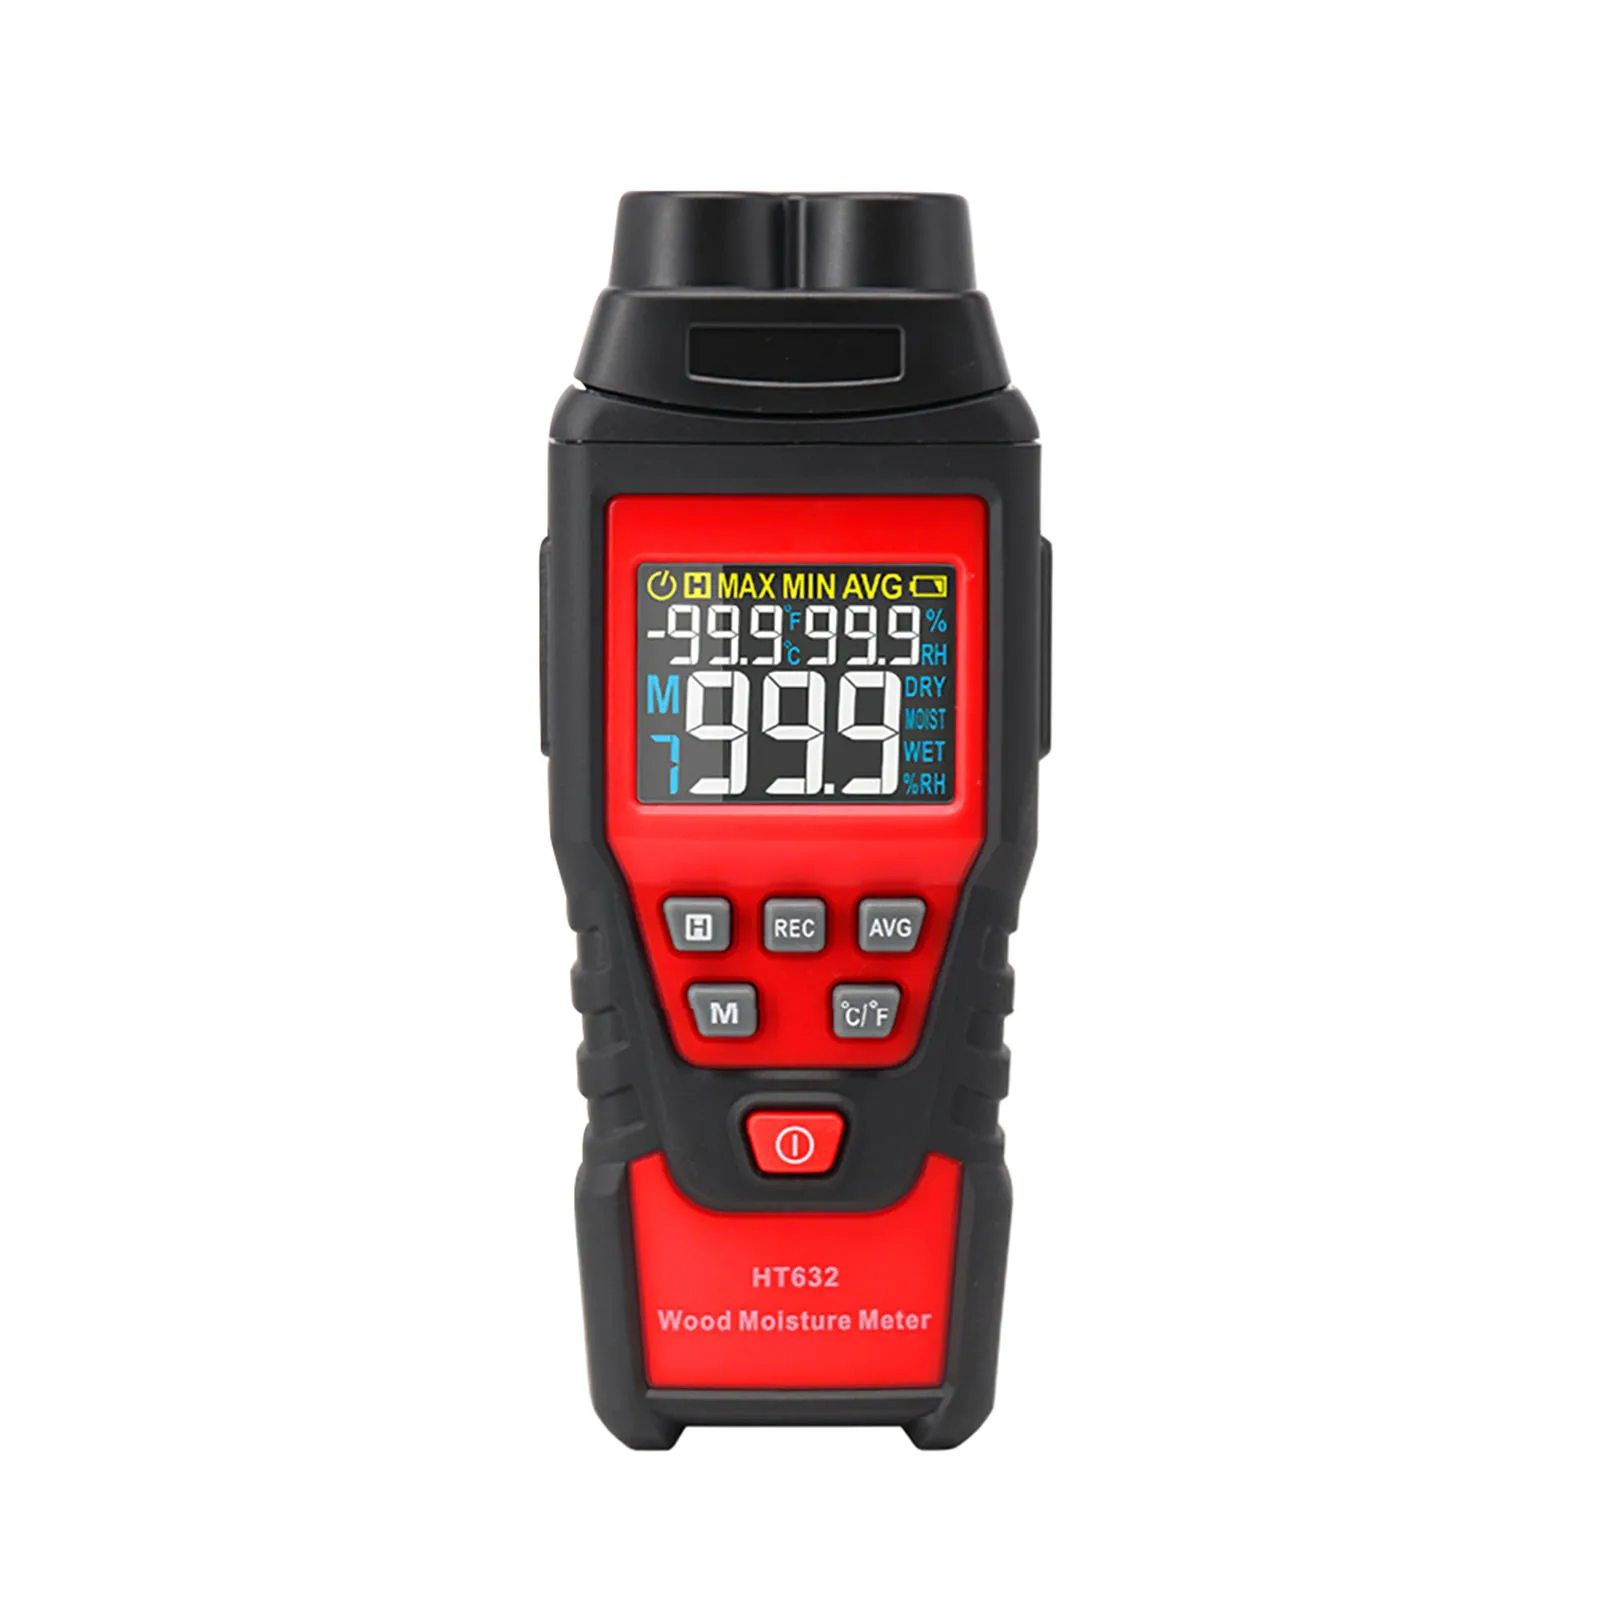 

HT632 Digital Wood Moisture Meter Wood Humidity Tester Hygrometer Timber Damp Paper Concreate Cement Detector Tester